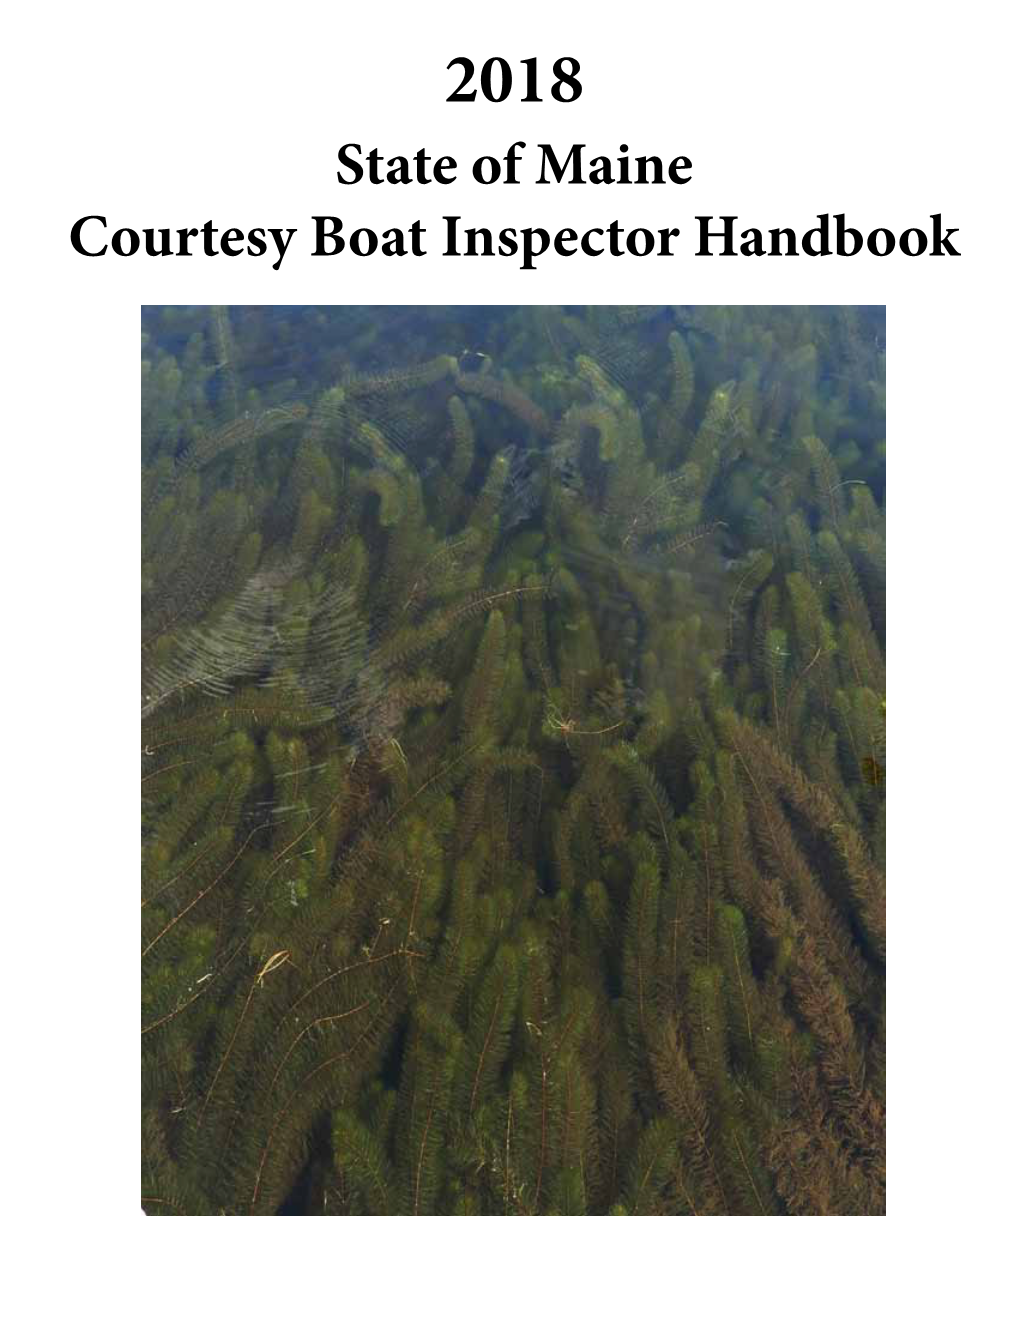 State of Maine Courtesy Boat Inspector Handbook